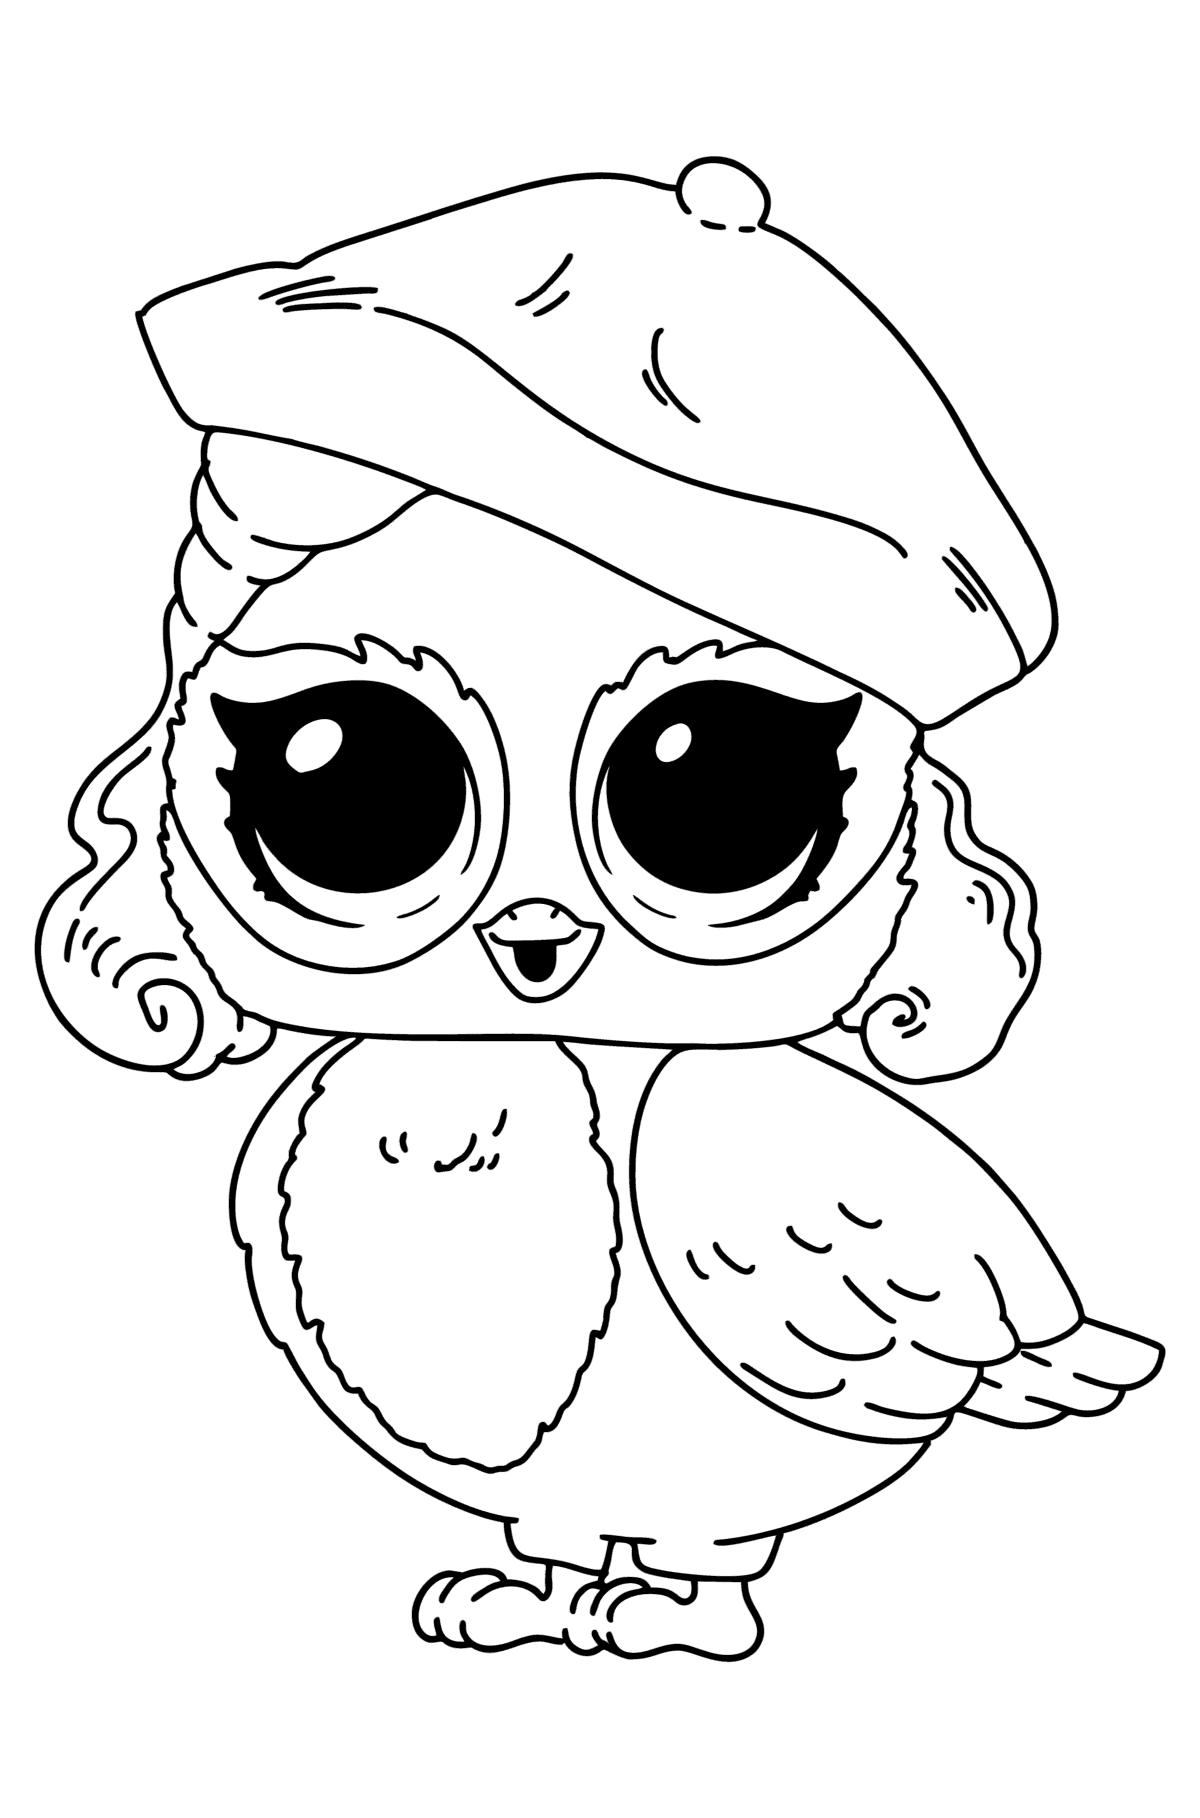 Coloring page LOL PET Angel Wings - Coloring Pages for Kids